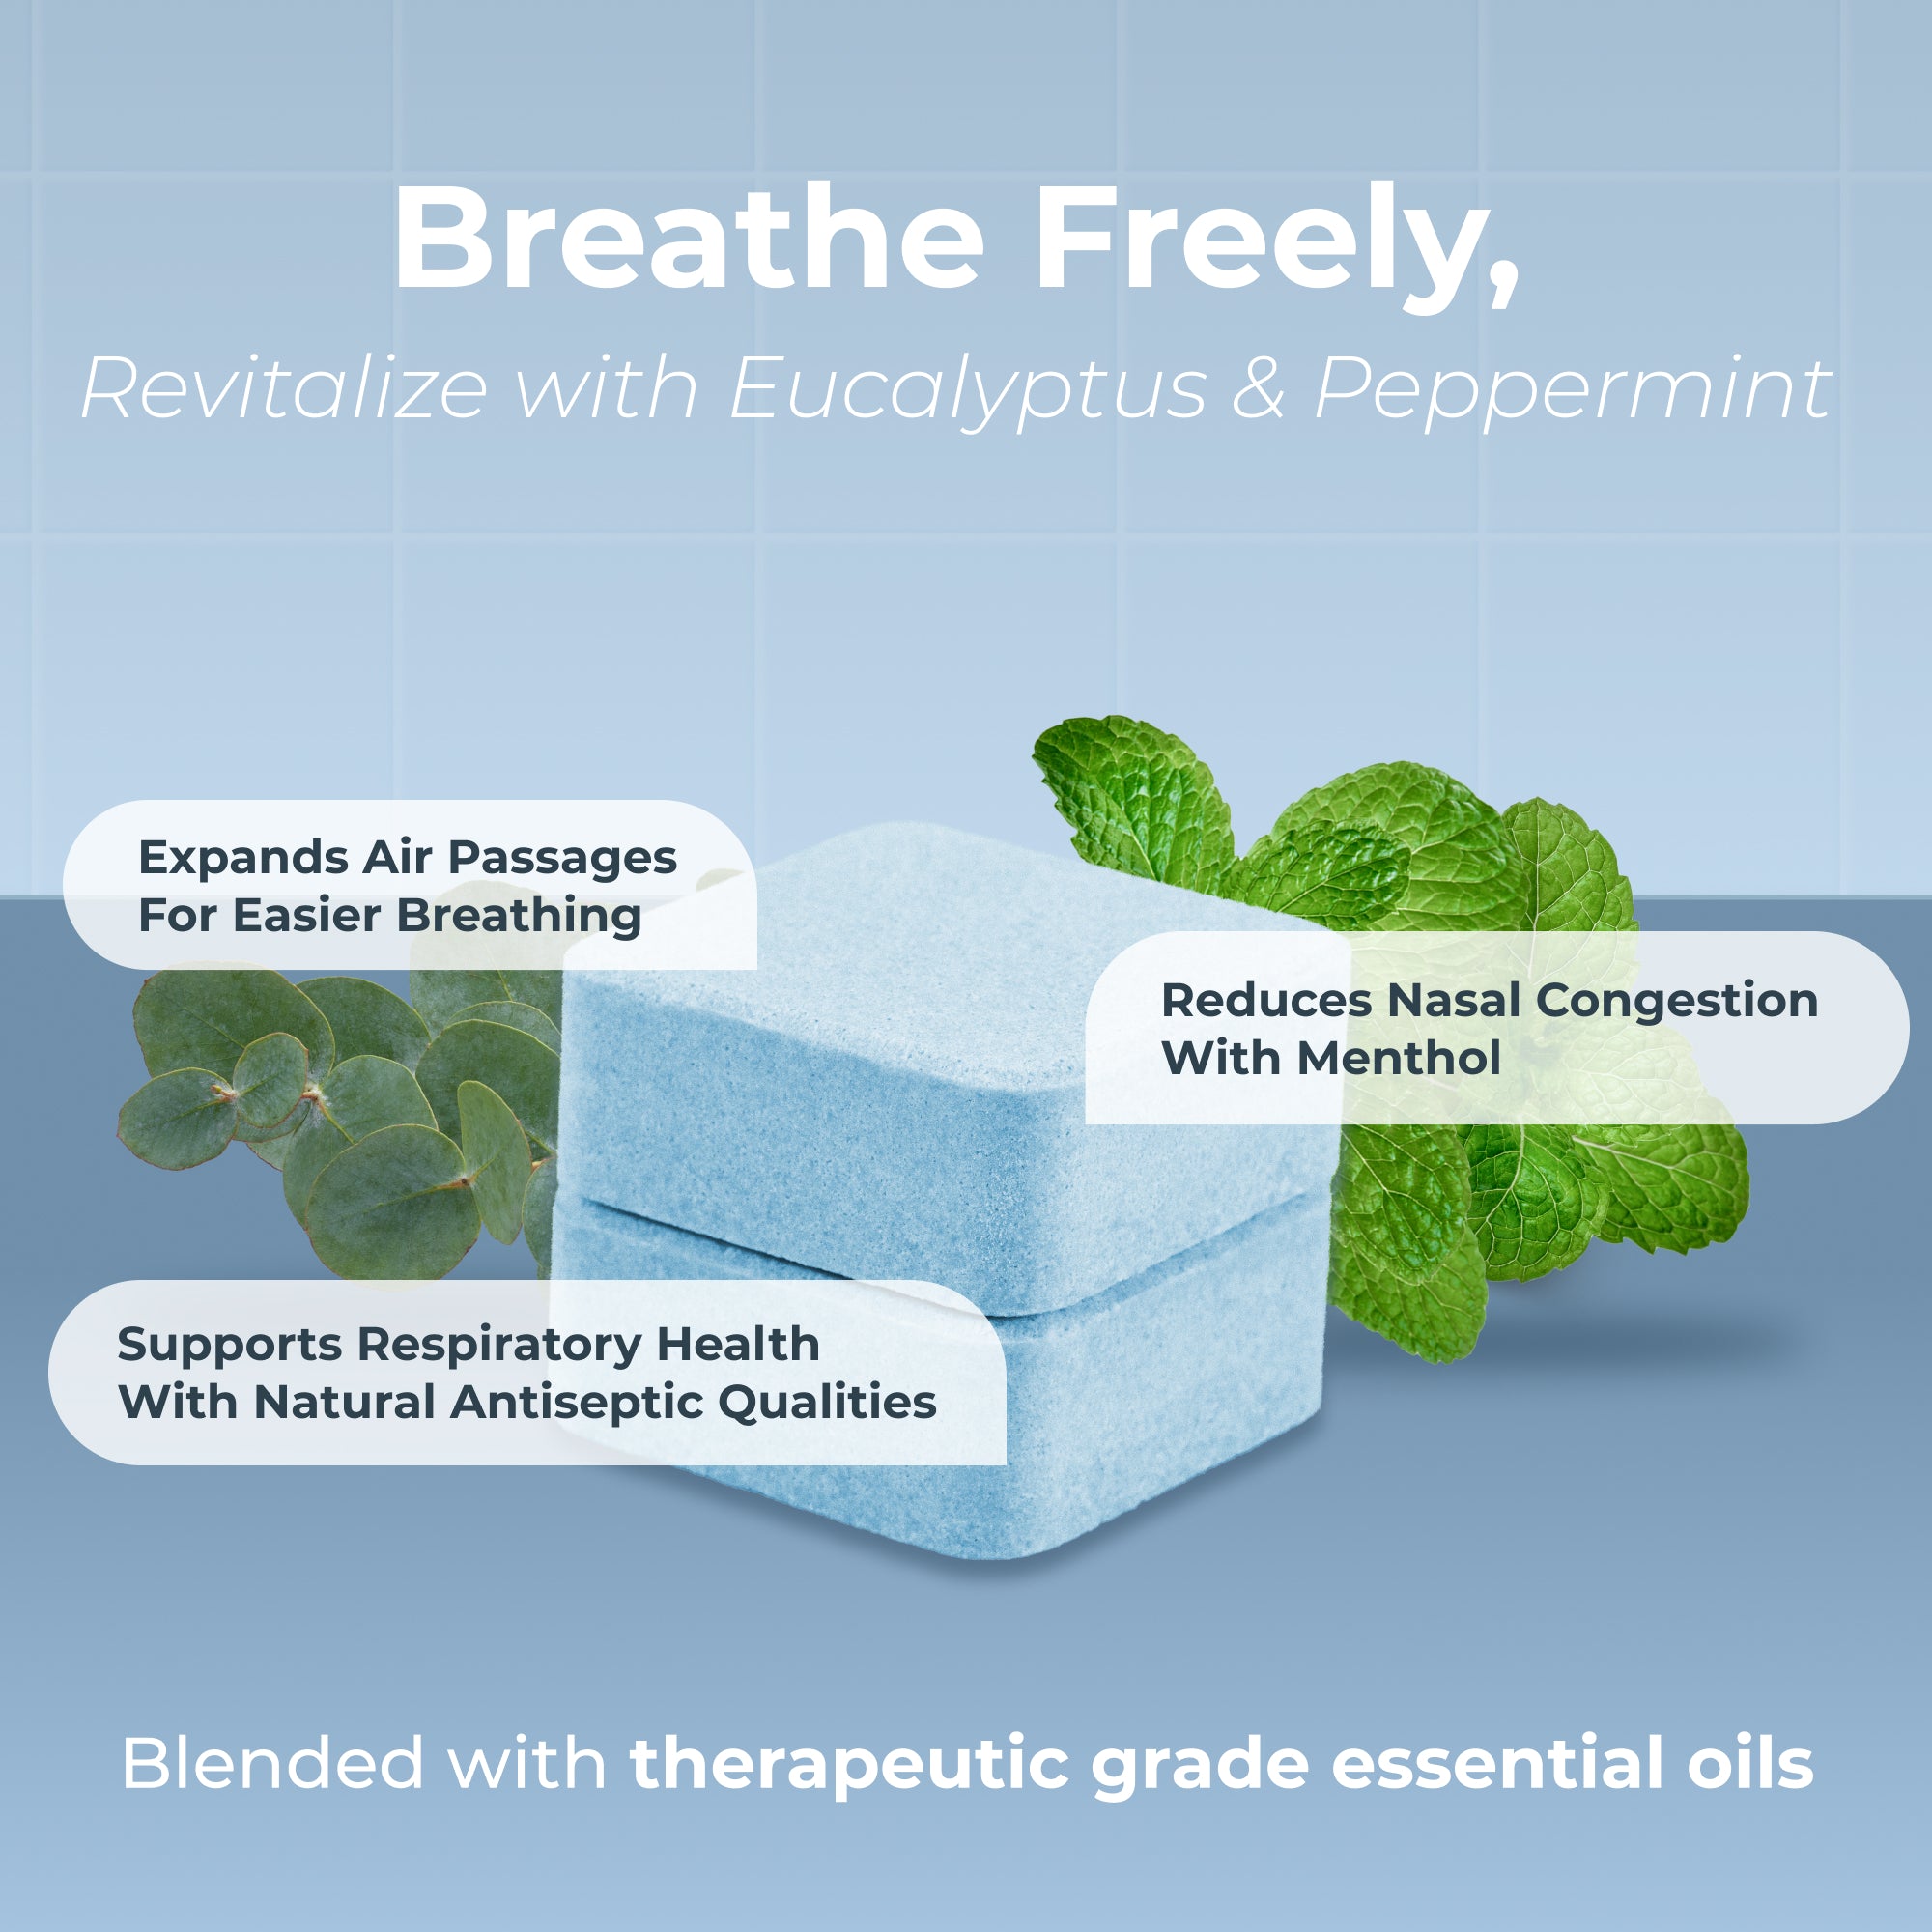 Promotional image for a product with eucalyptus and peppermint claiming respiratory health benefits.